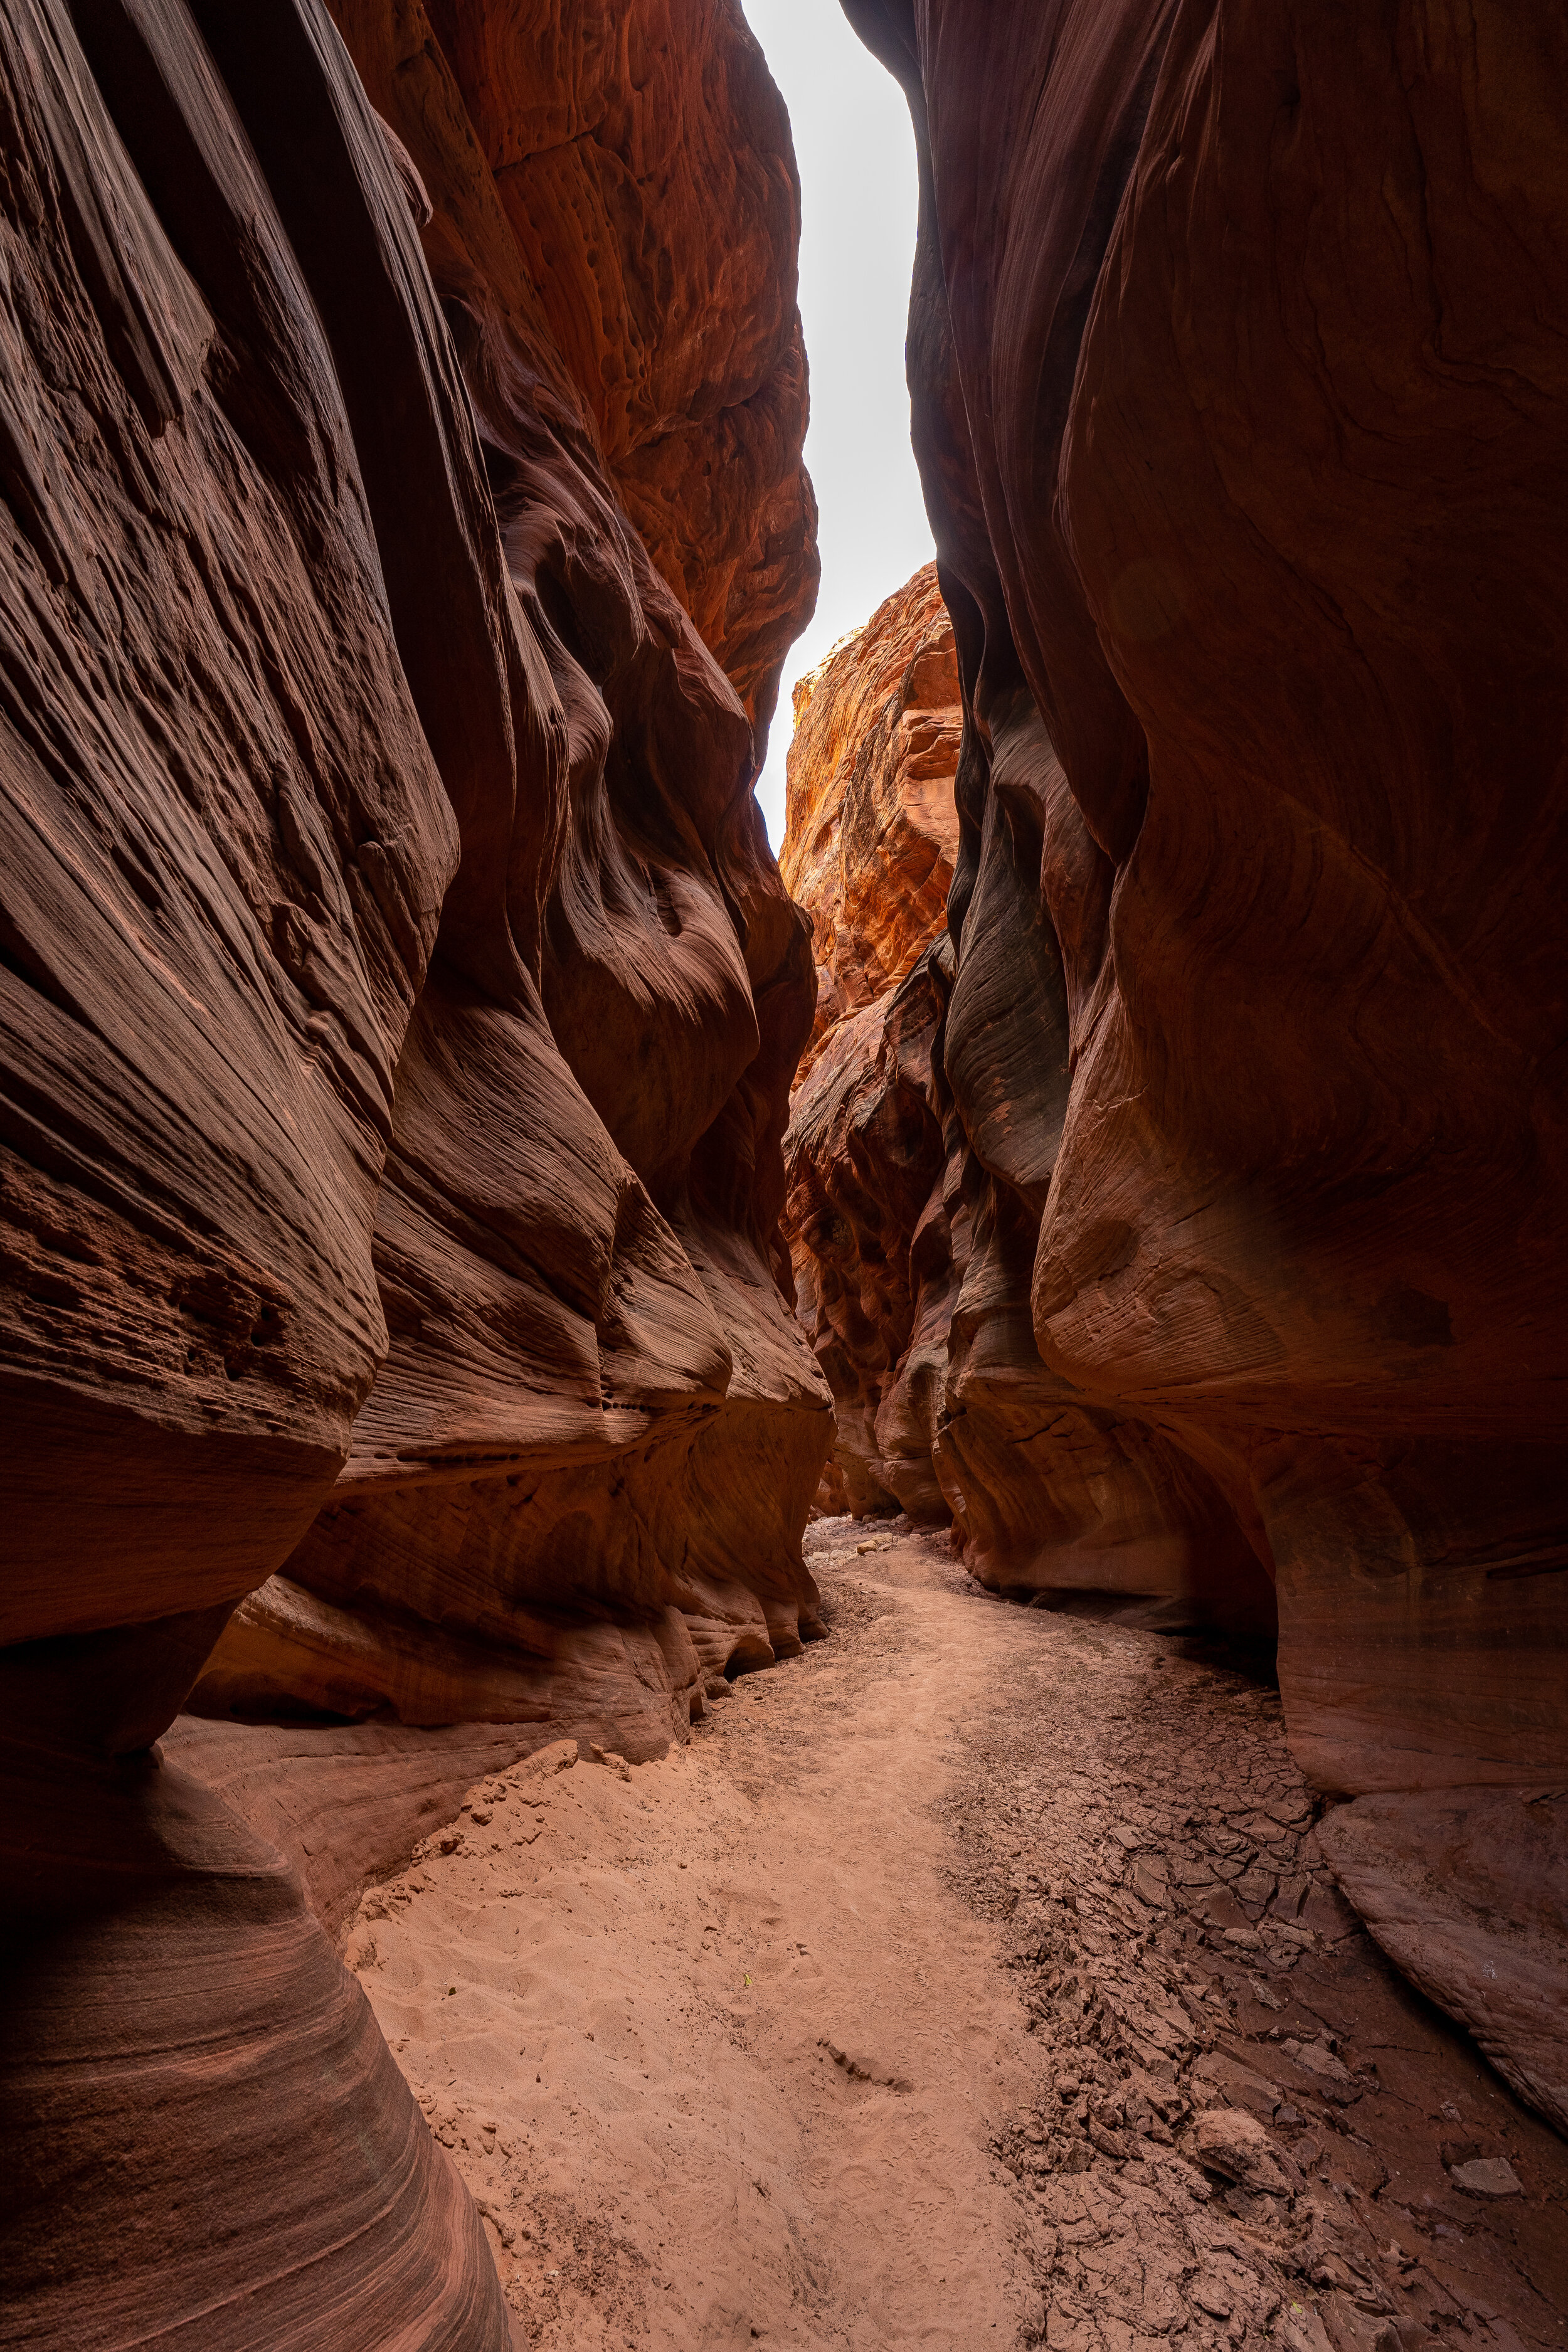  Craig photographed this slot canyon in Escalante National Monument on one of his hikes.  